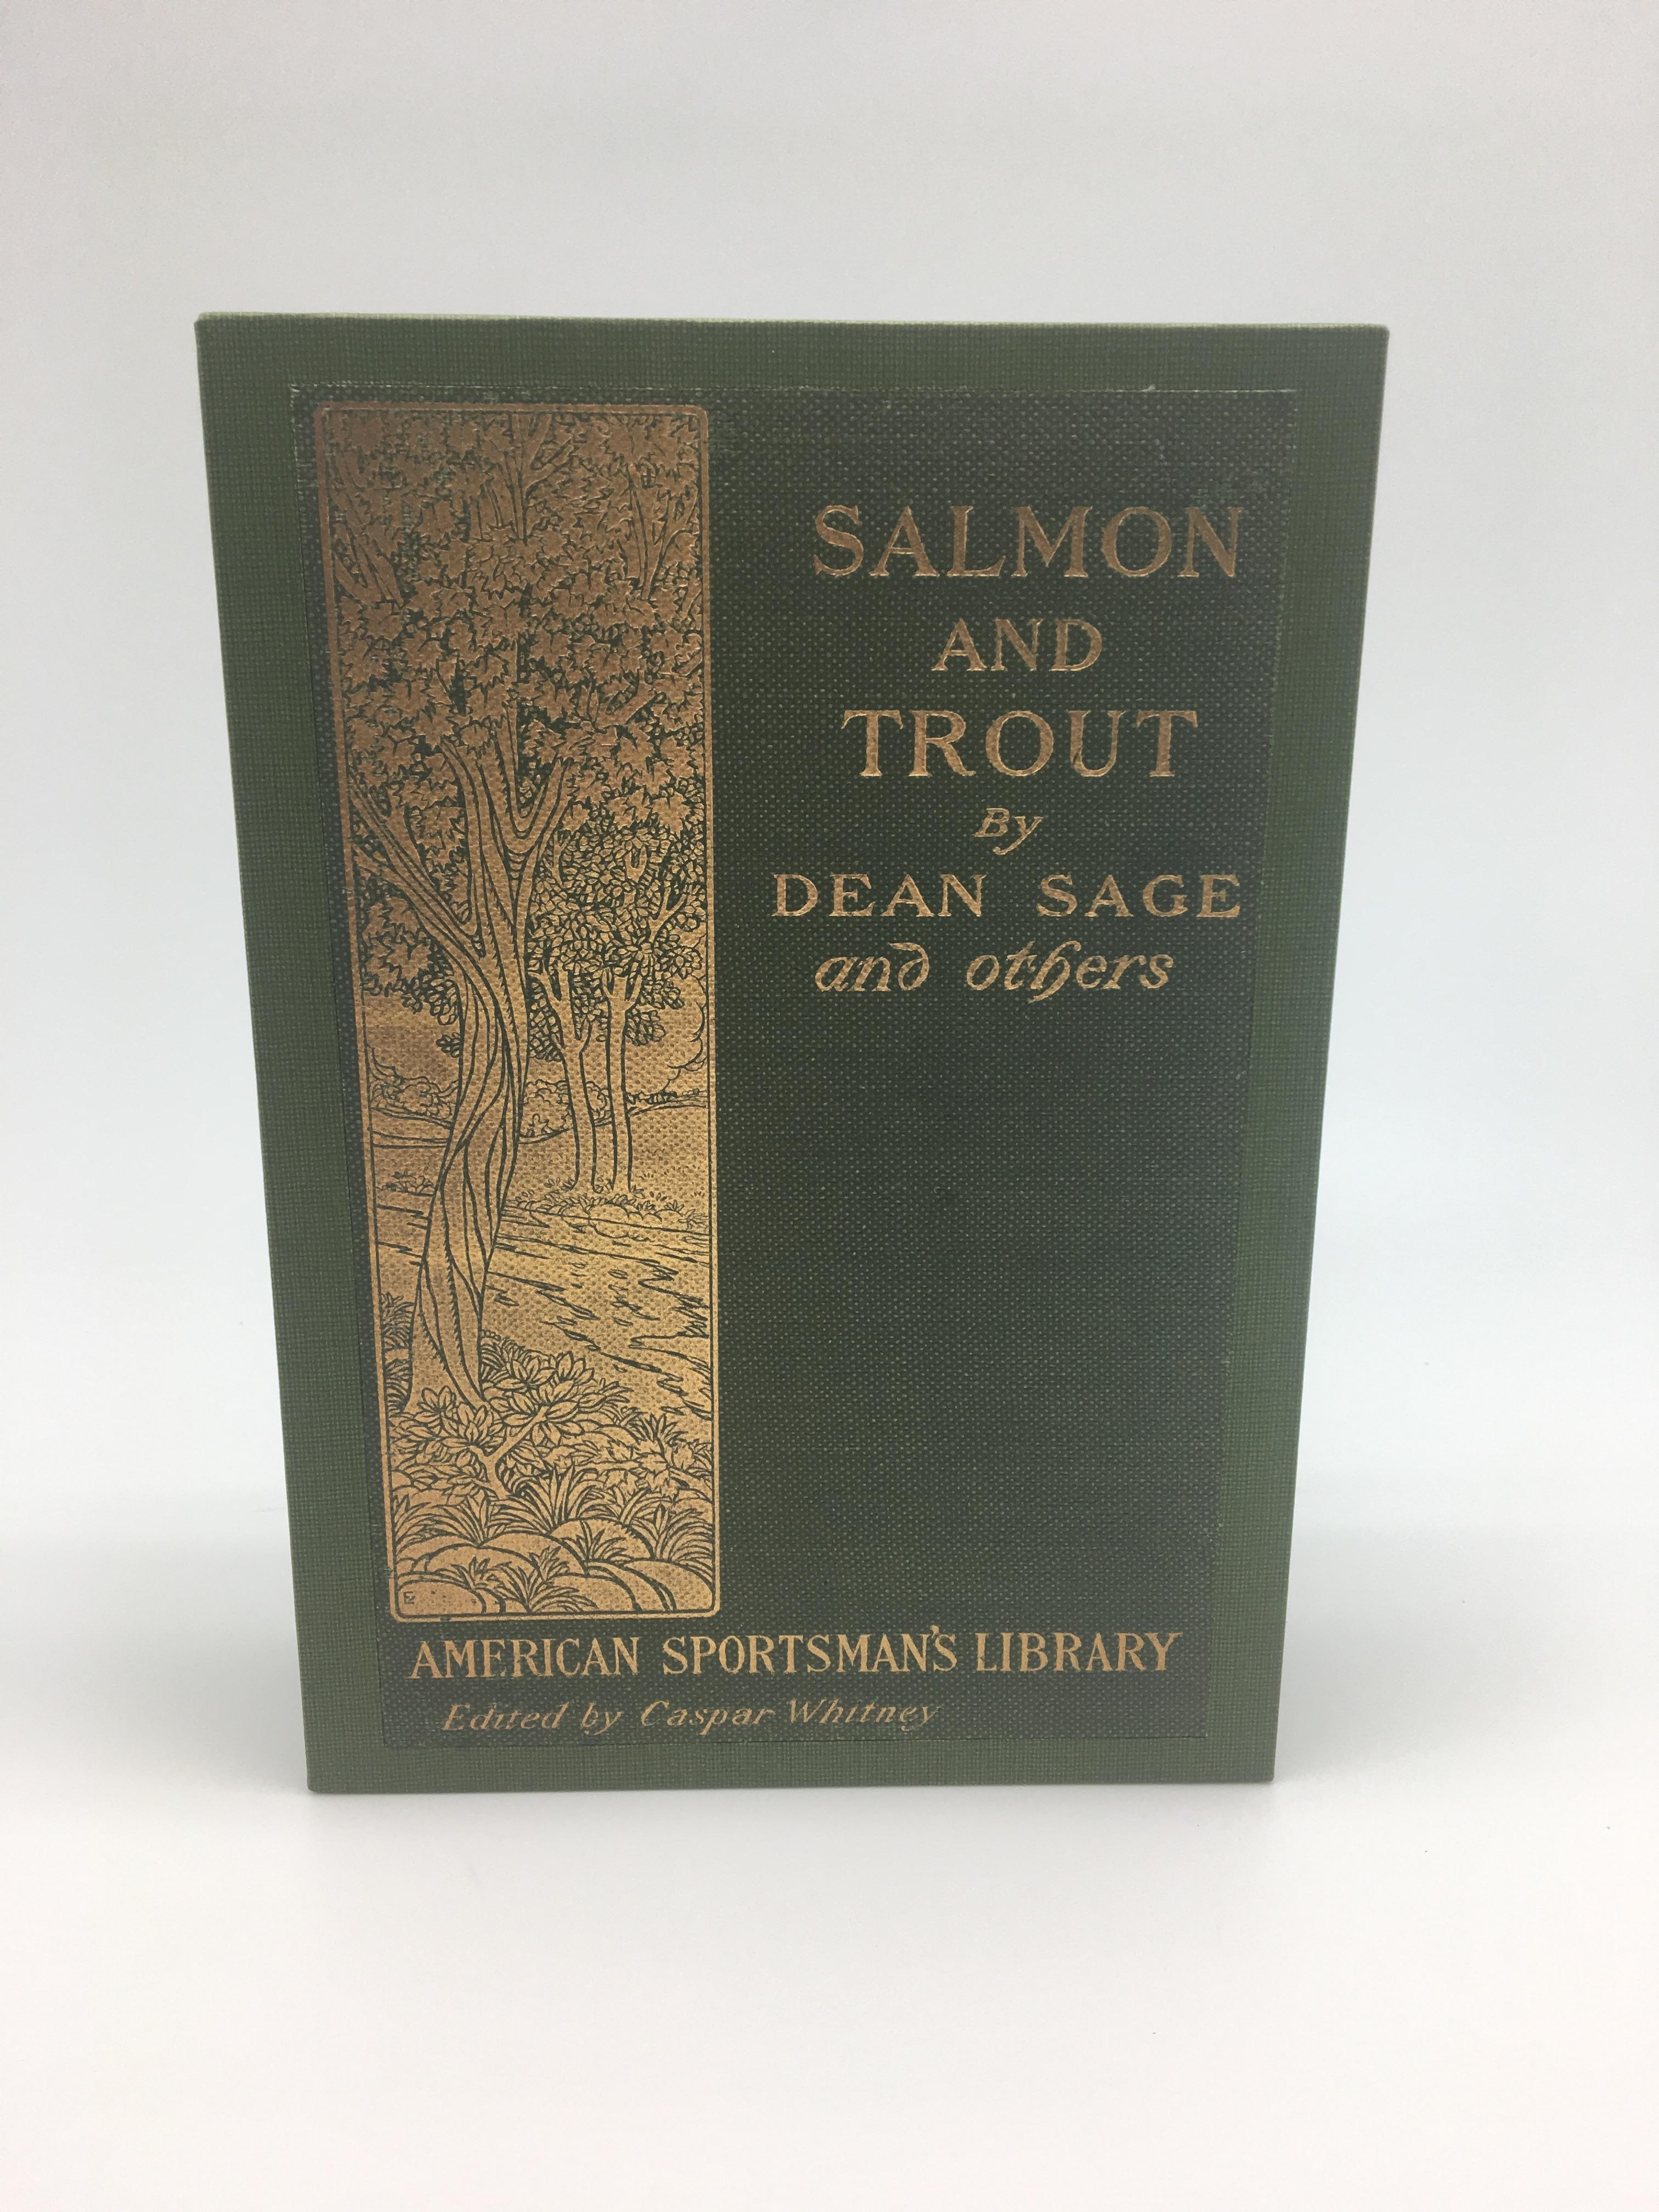 Sage, Dean, Salmon and Trout. New York: Macmillan Co., 1902. First edition. Octavo, rebound in green cloth and quarter leather binding. Housed in a matching slipcase with pasted original cover board.

This is the first edition copy of Salmon and